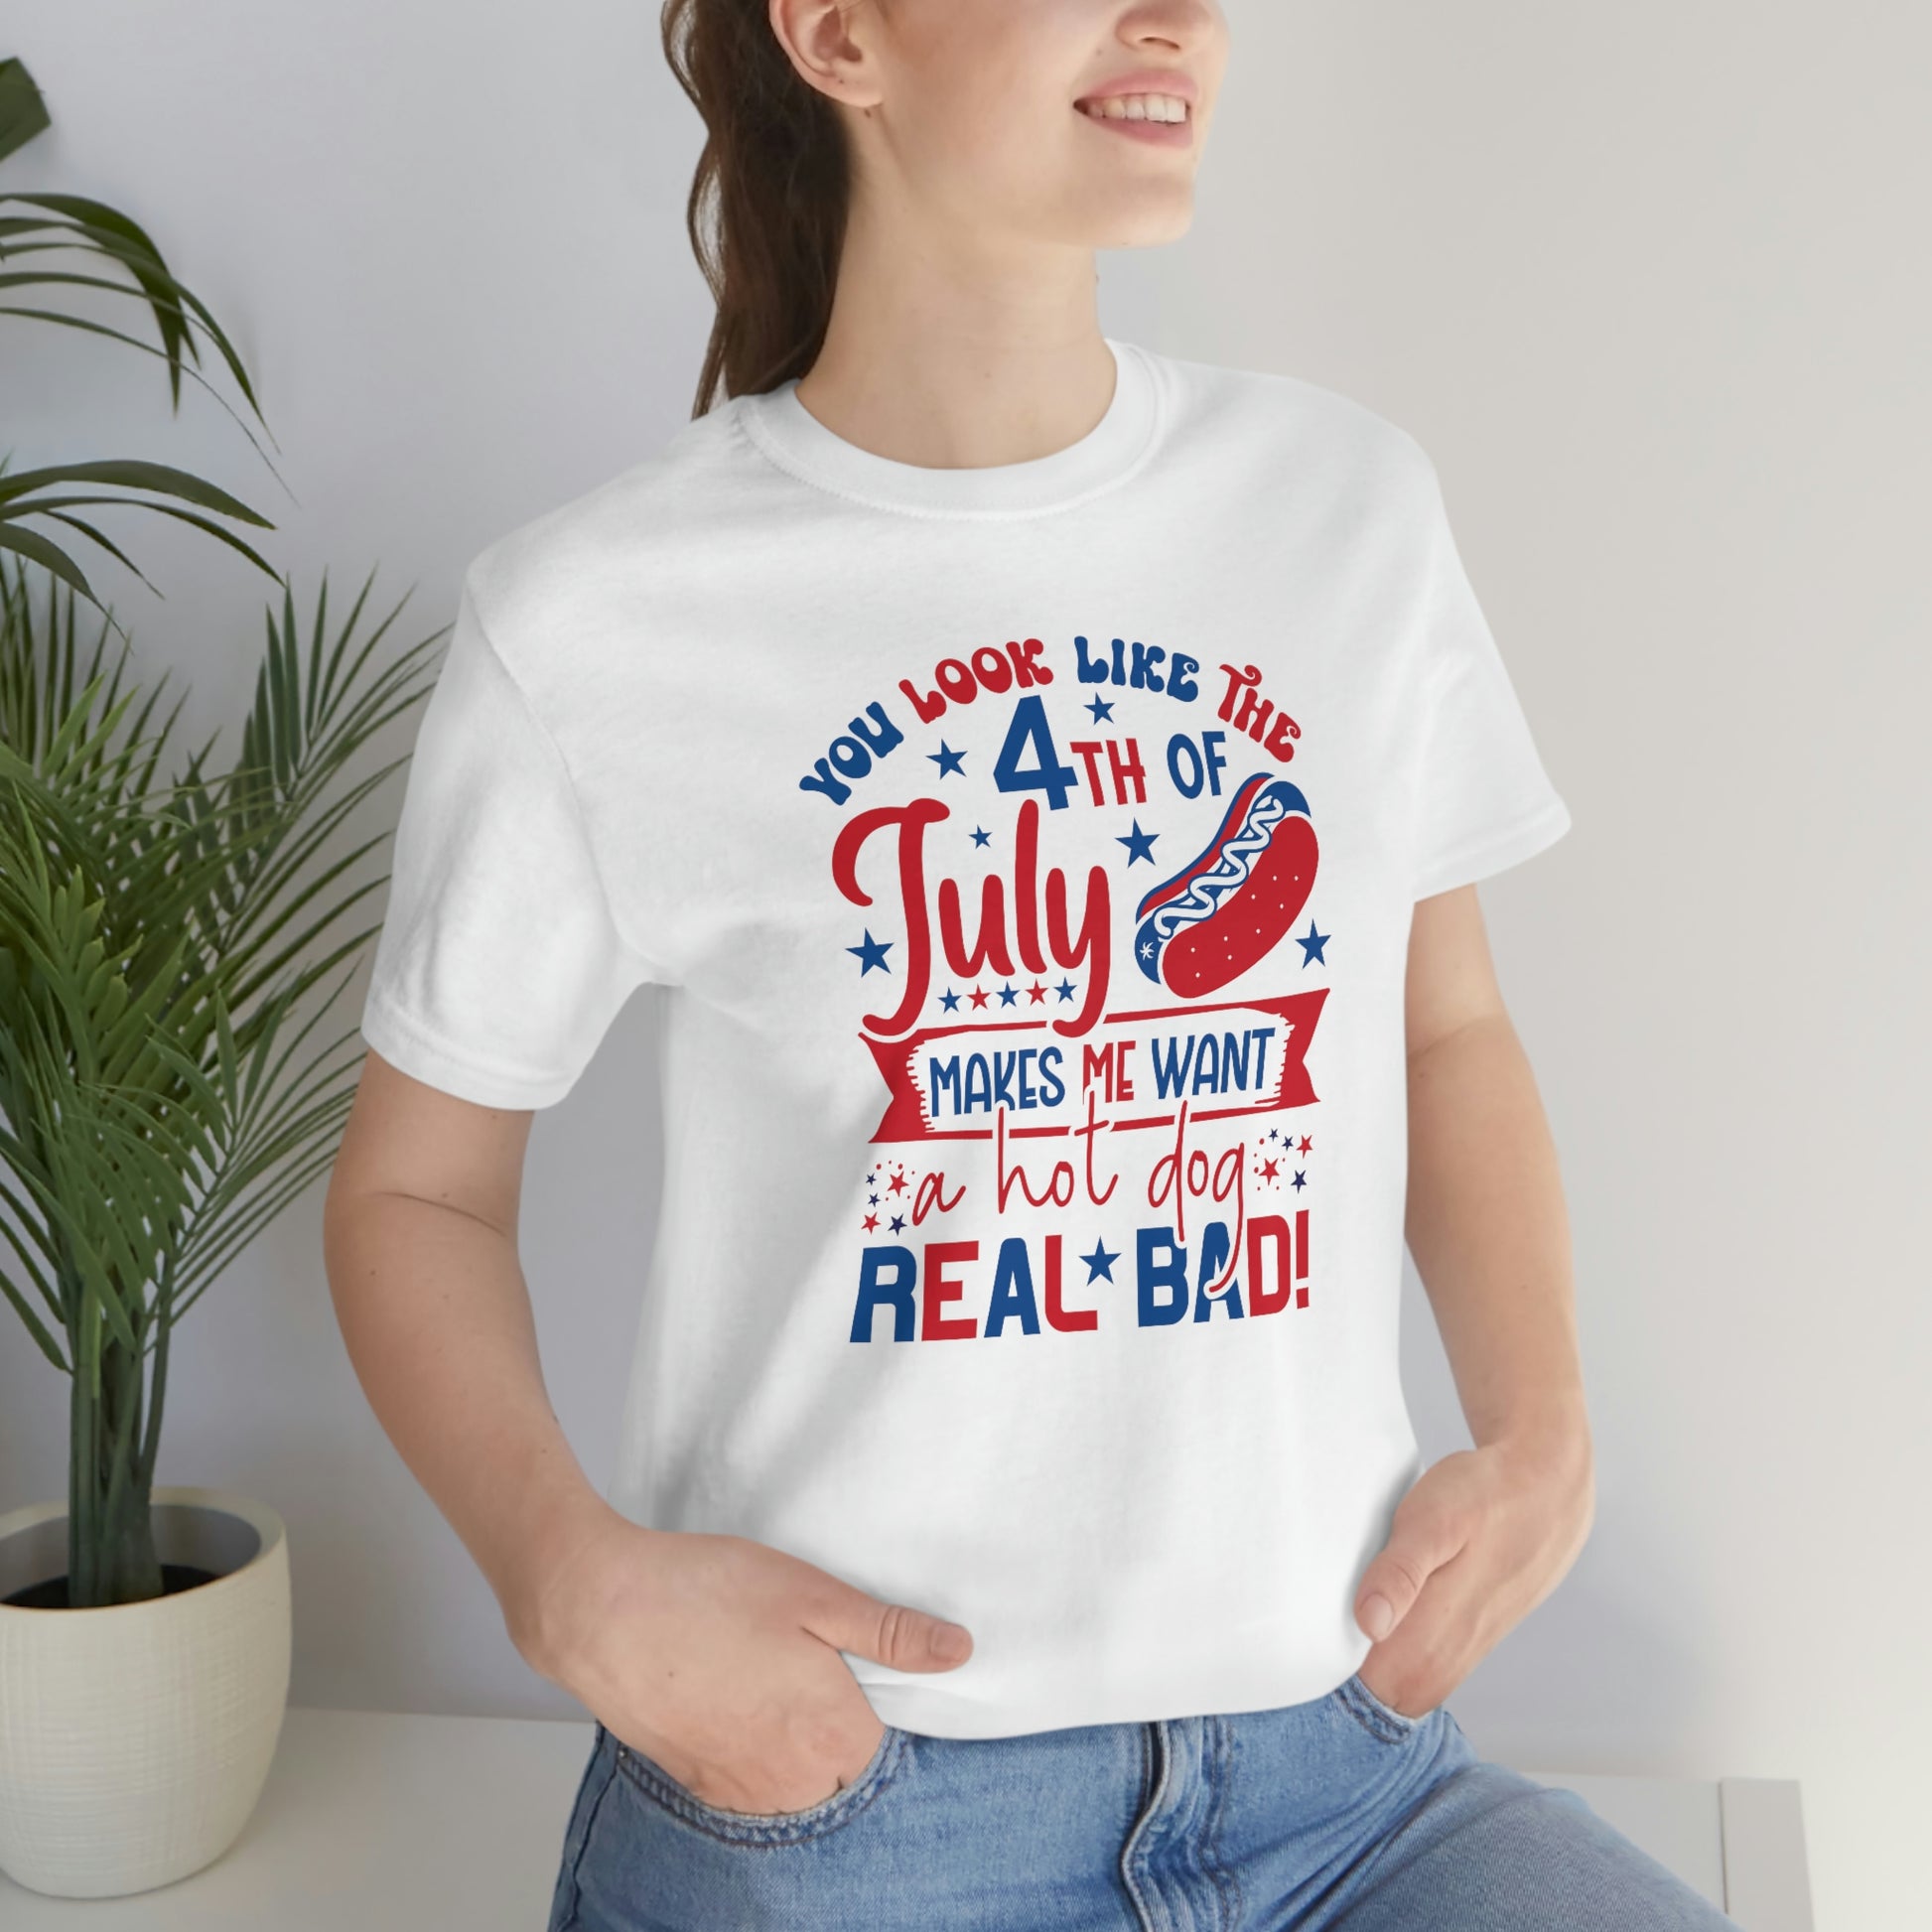 You Look Like the 4th of July Makes Me Want a Hot Dog Real Bad Unisex Jersey Short Sleeve Tee